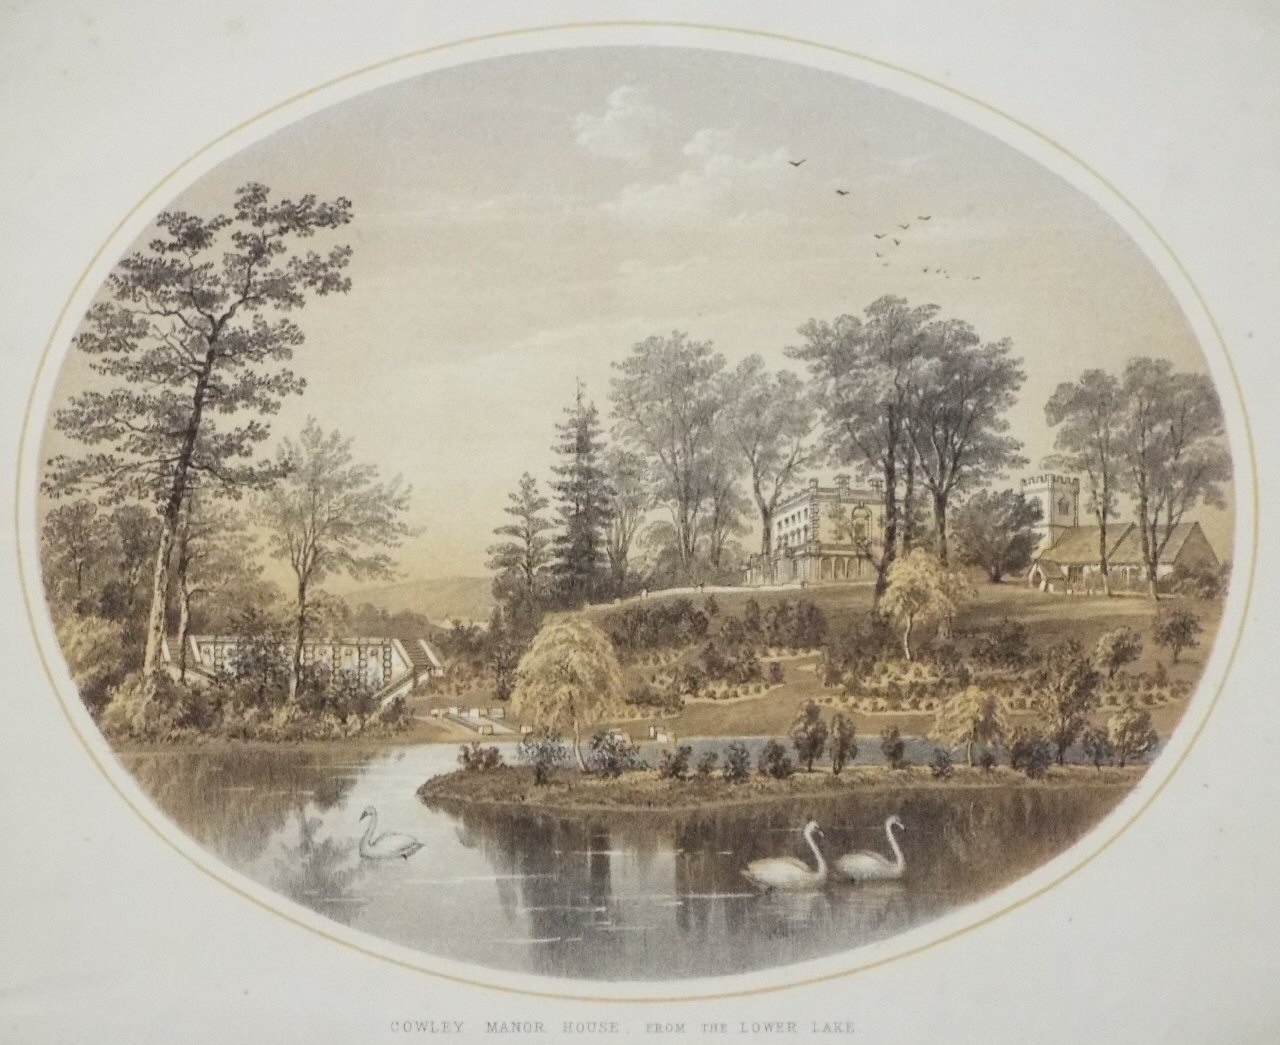 Lithograph - Cowley Manor House from the Lower Lake